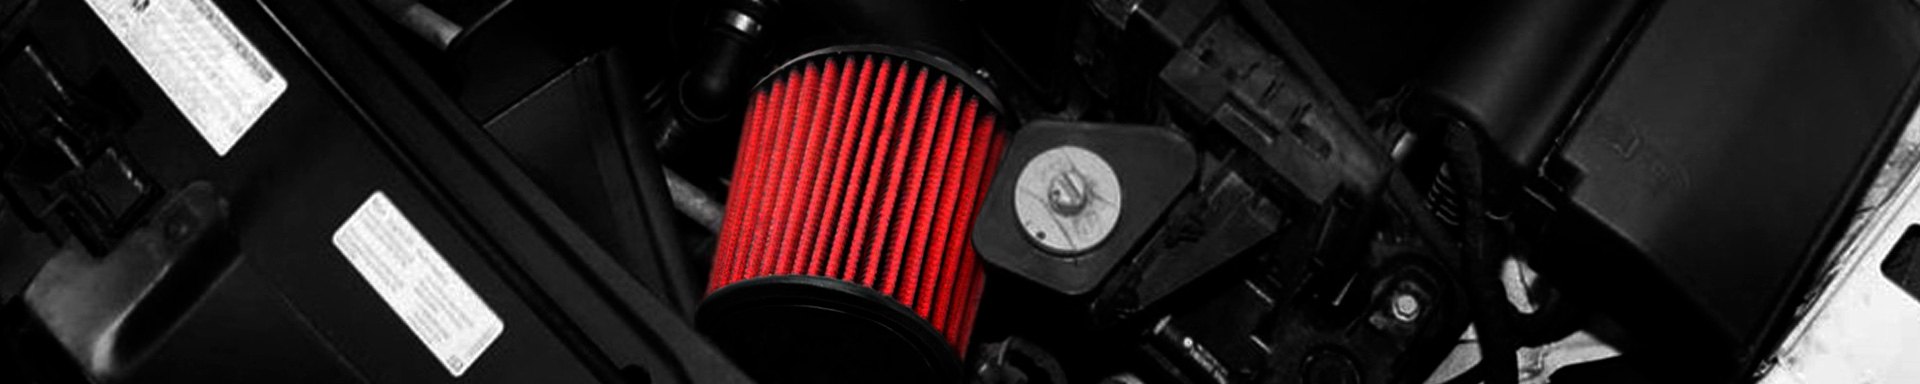 Next Level Performance with AEM Air Intake System for Volkswagen Cars